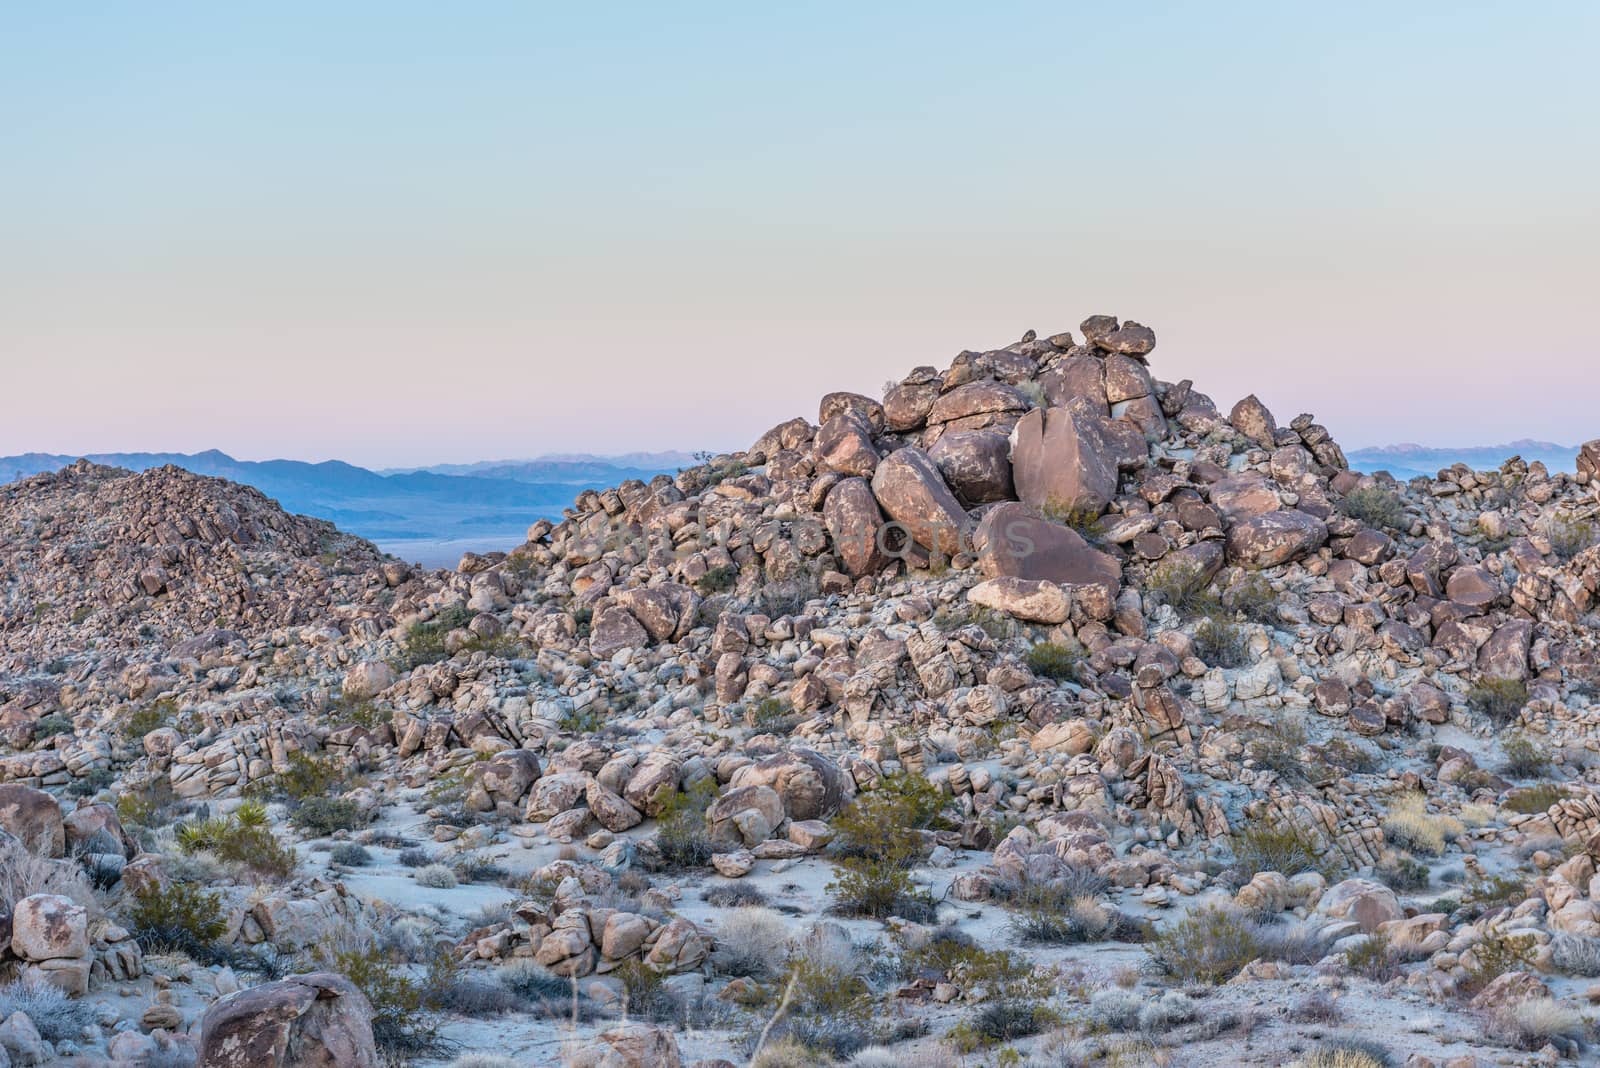 Dusk in the Porcupine Wash wilderness area in Joshua Tree National Park, California